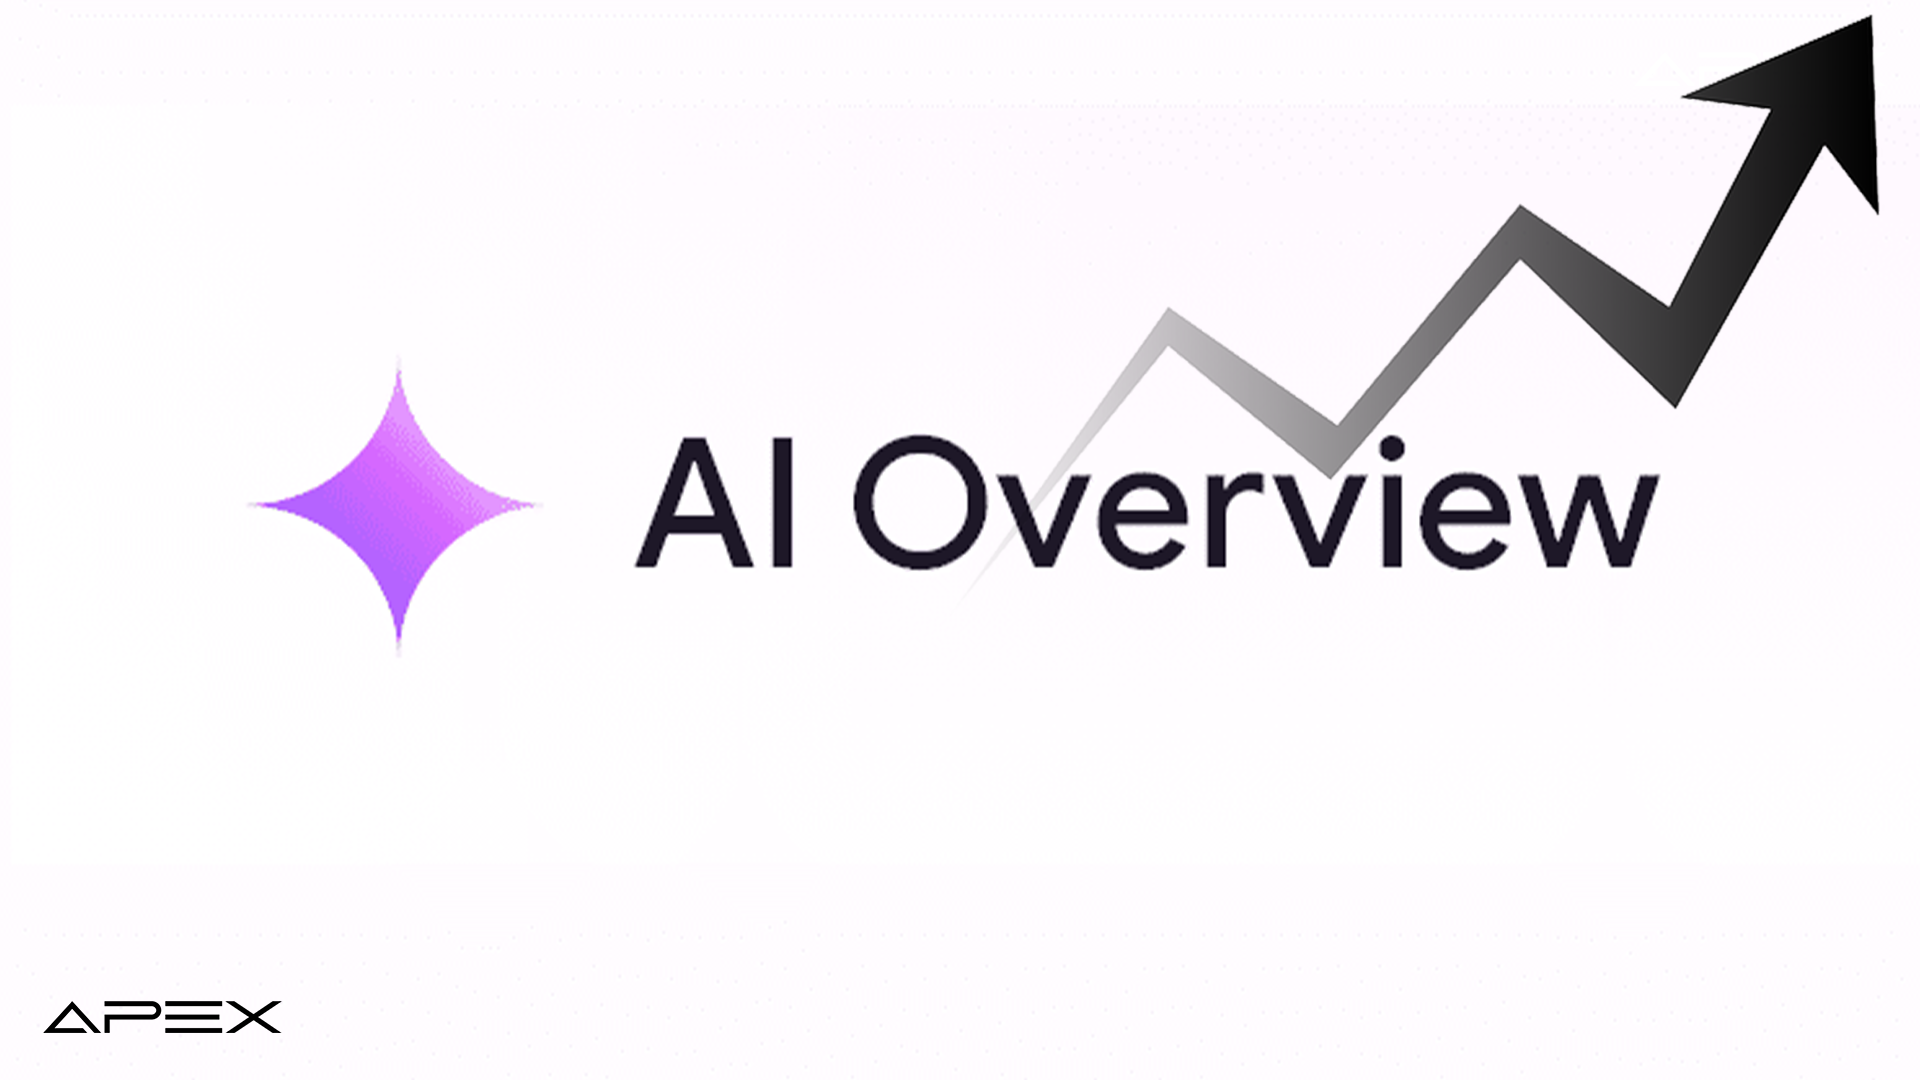 Google's AI Overview: A Game Changer for Search and SEO?